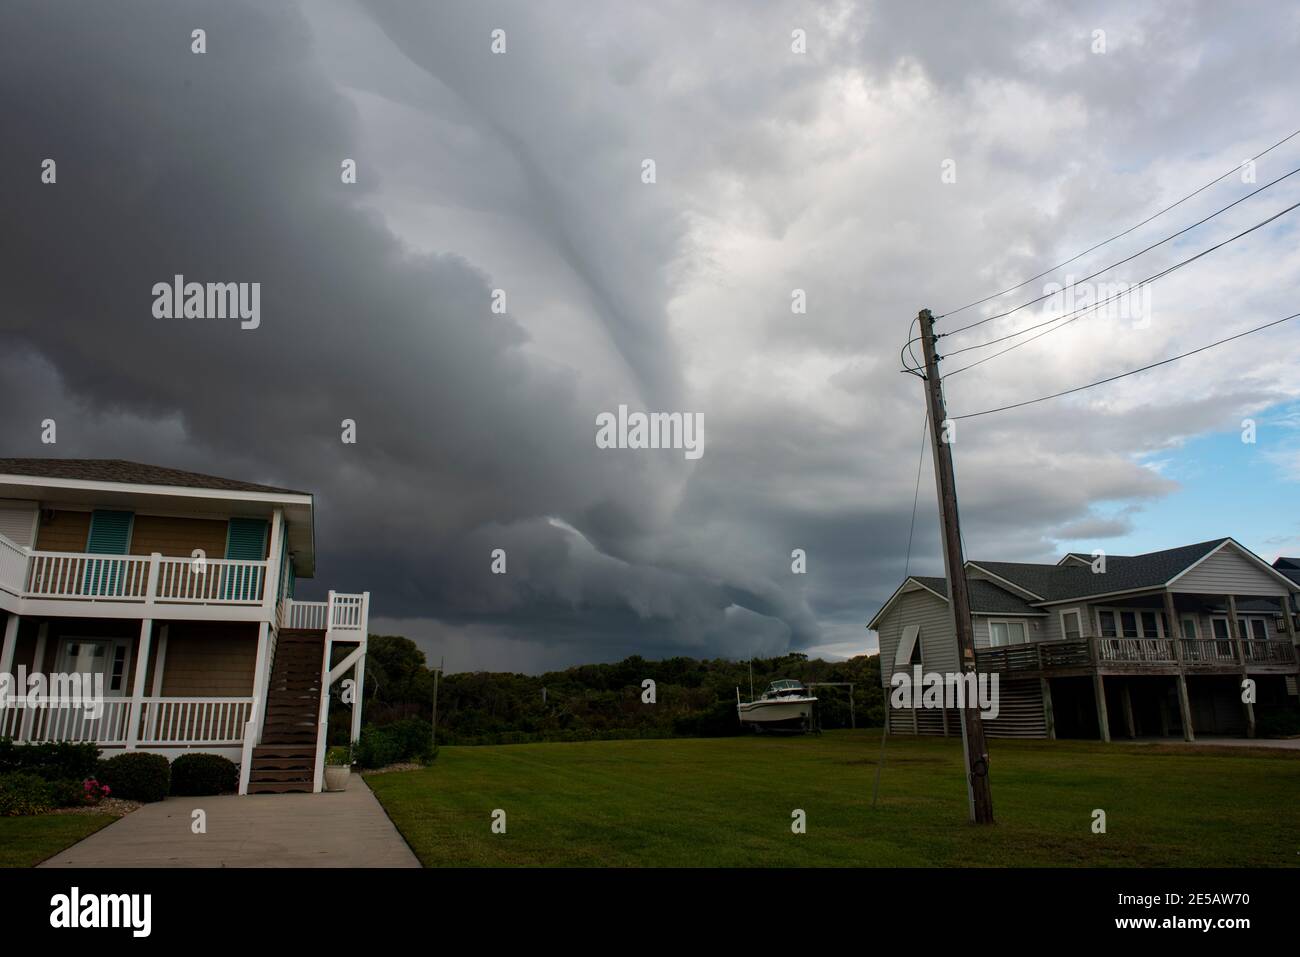 A shelf clouds appears on the leading edge of a storm in Atlantic Beach, North Carolina. Shelf clouds are a type of arcus cloud. Stock Photo